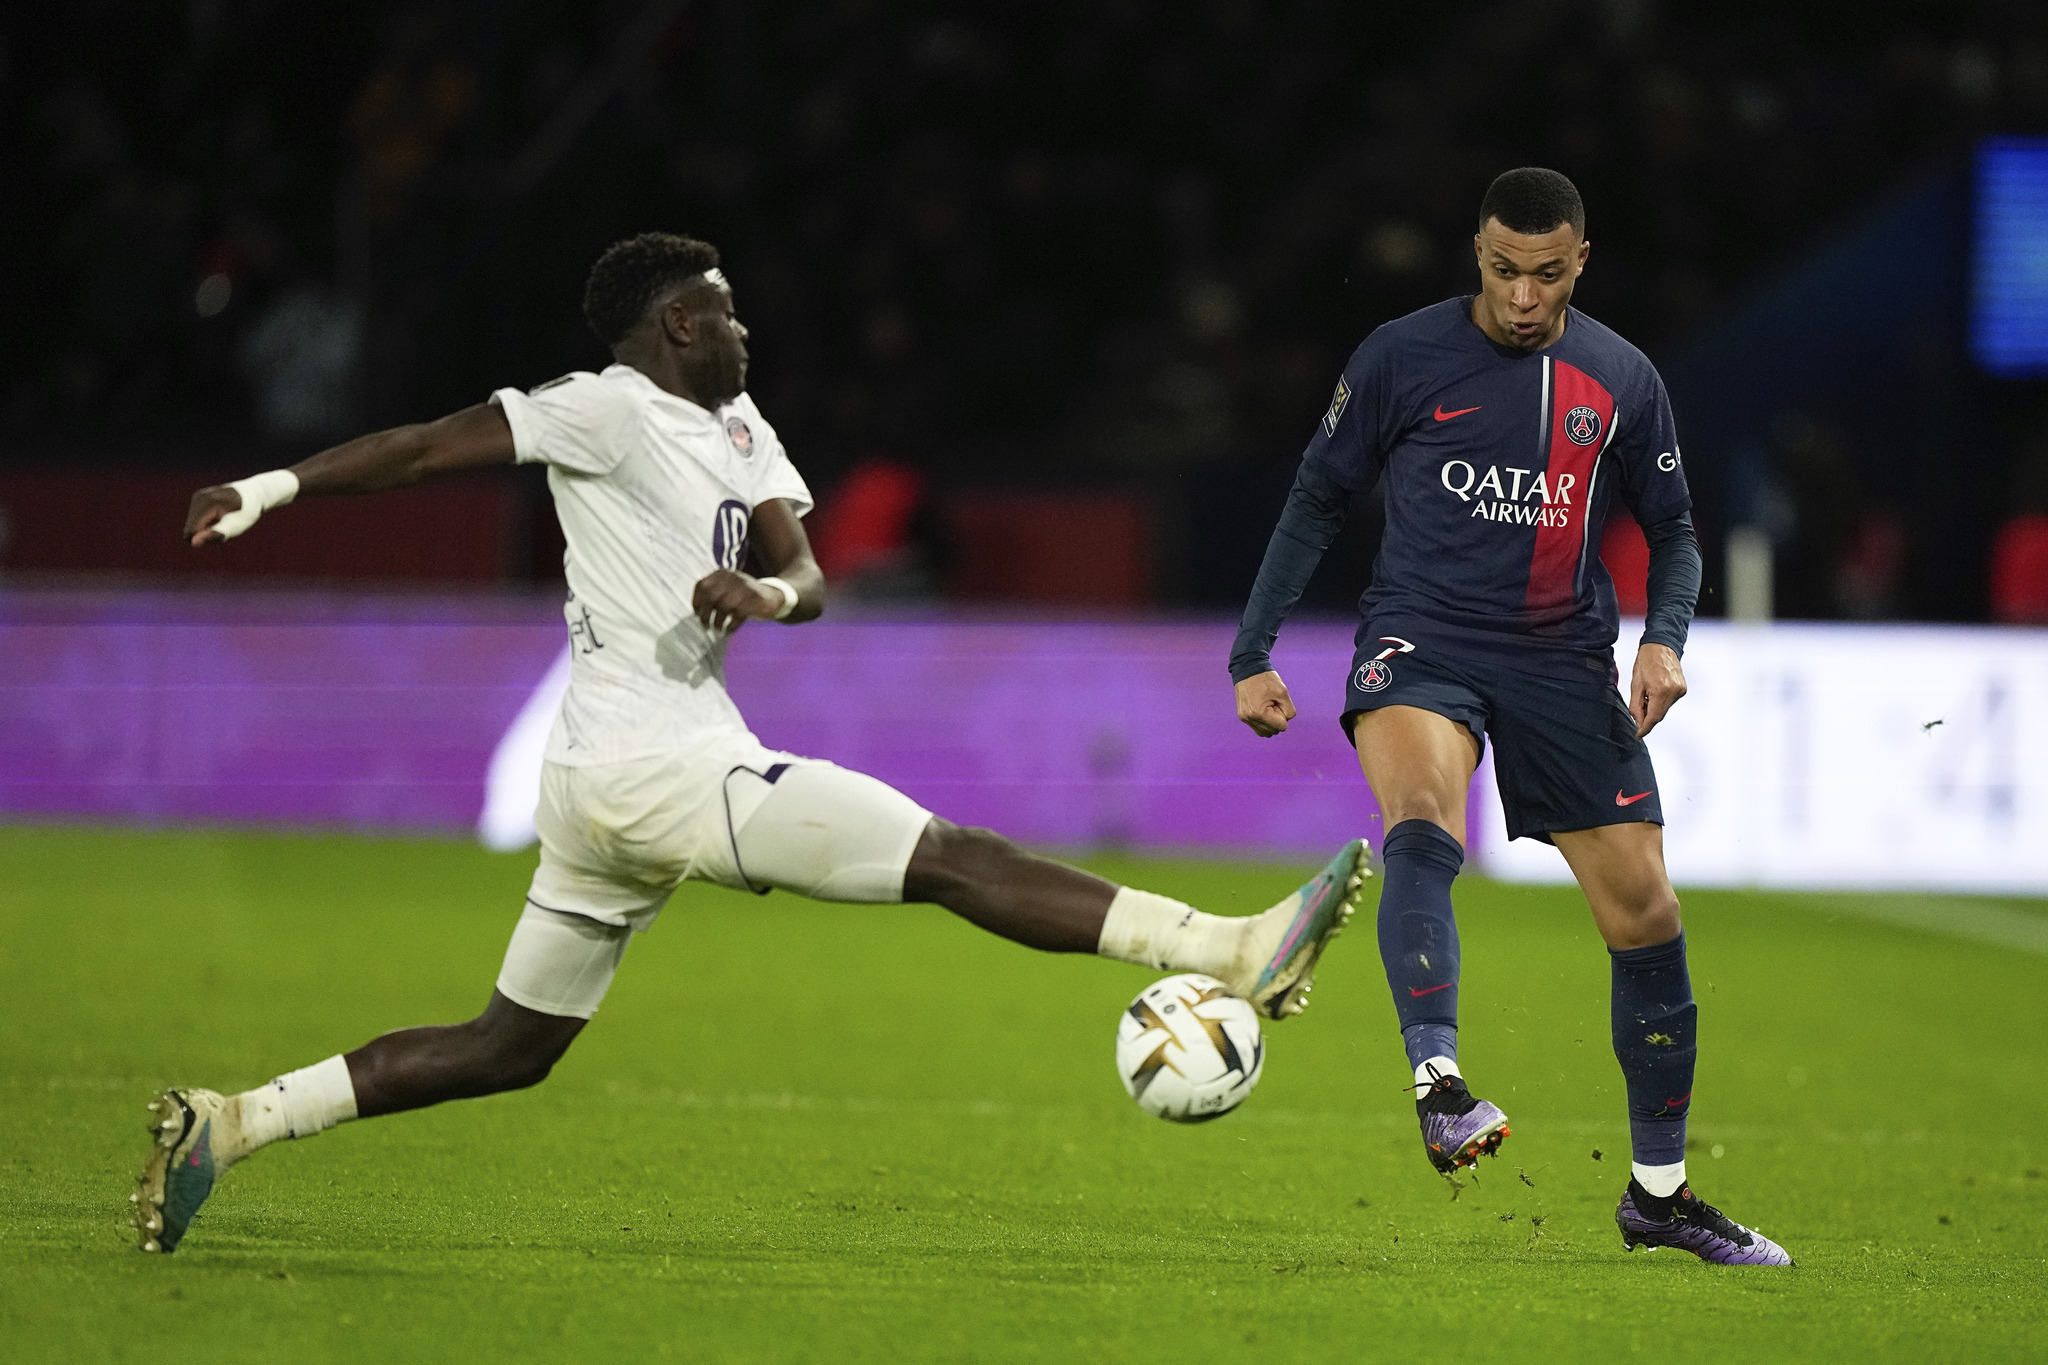 Toulouse's Christian Mawissa, left, tackles Kylian Mbappe